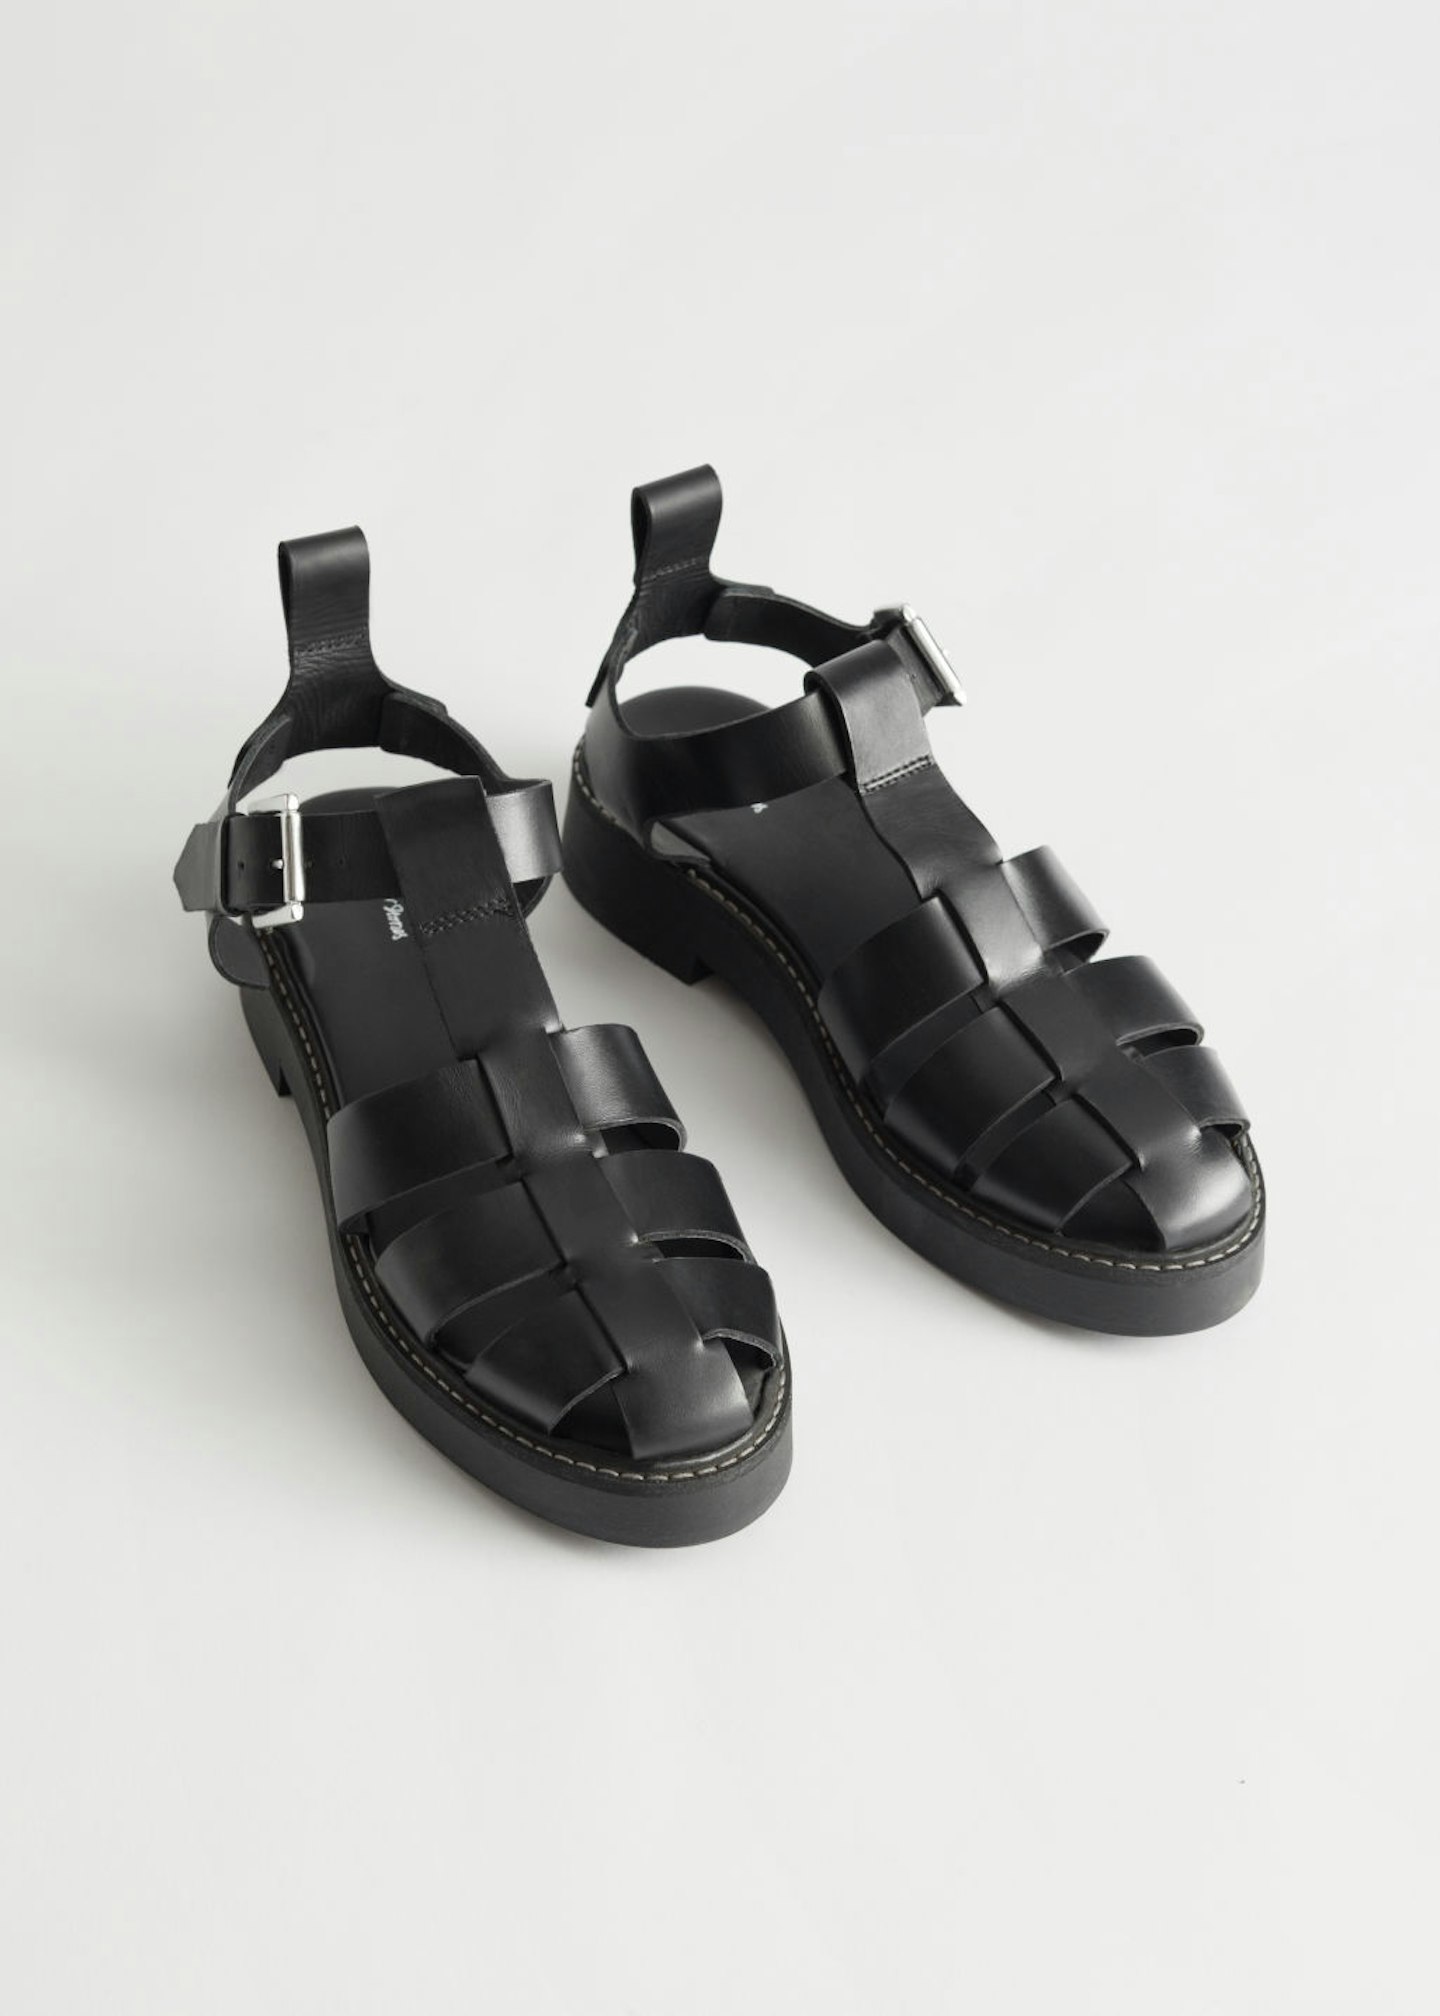 & Other Stories, Chunky Leather Gladiator Sandals, £95